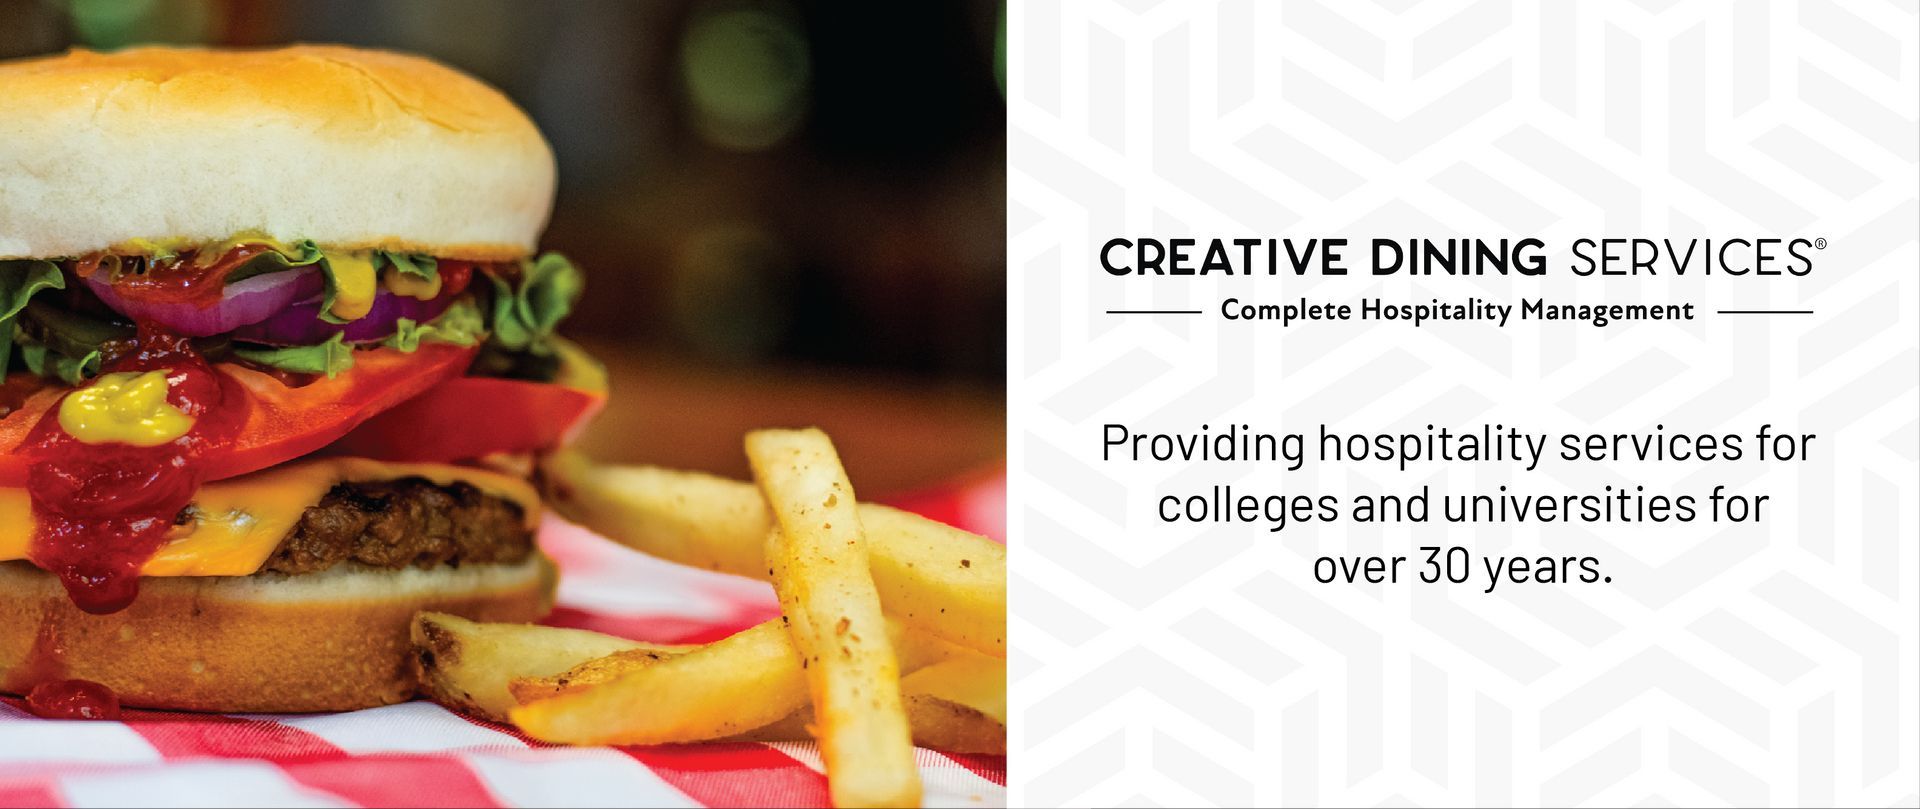 Creative Dining Services: Providing hospitality services for colleges and universities for over 30 years.